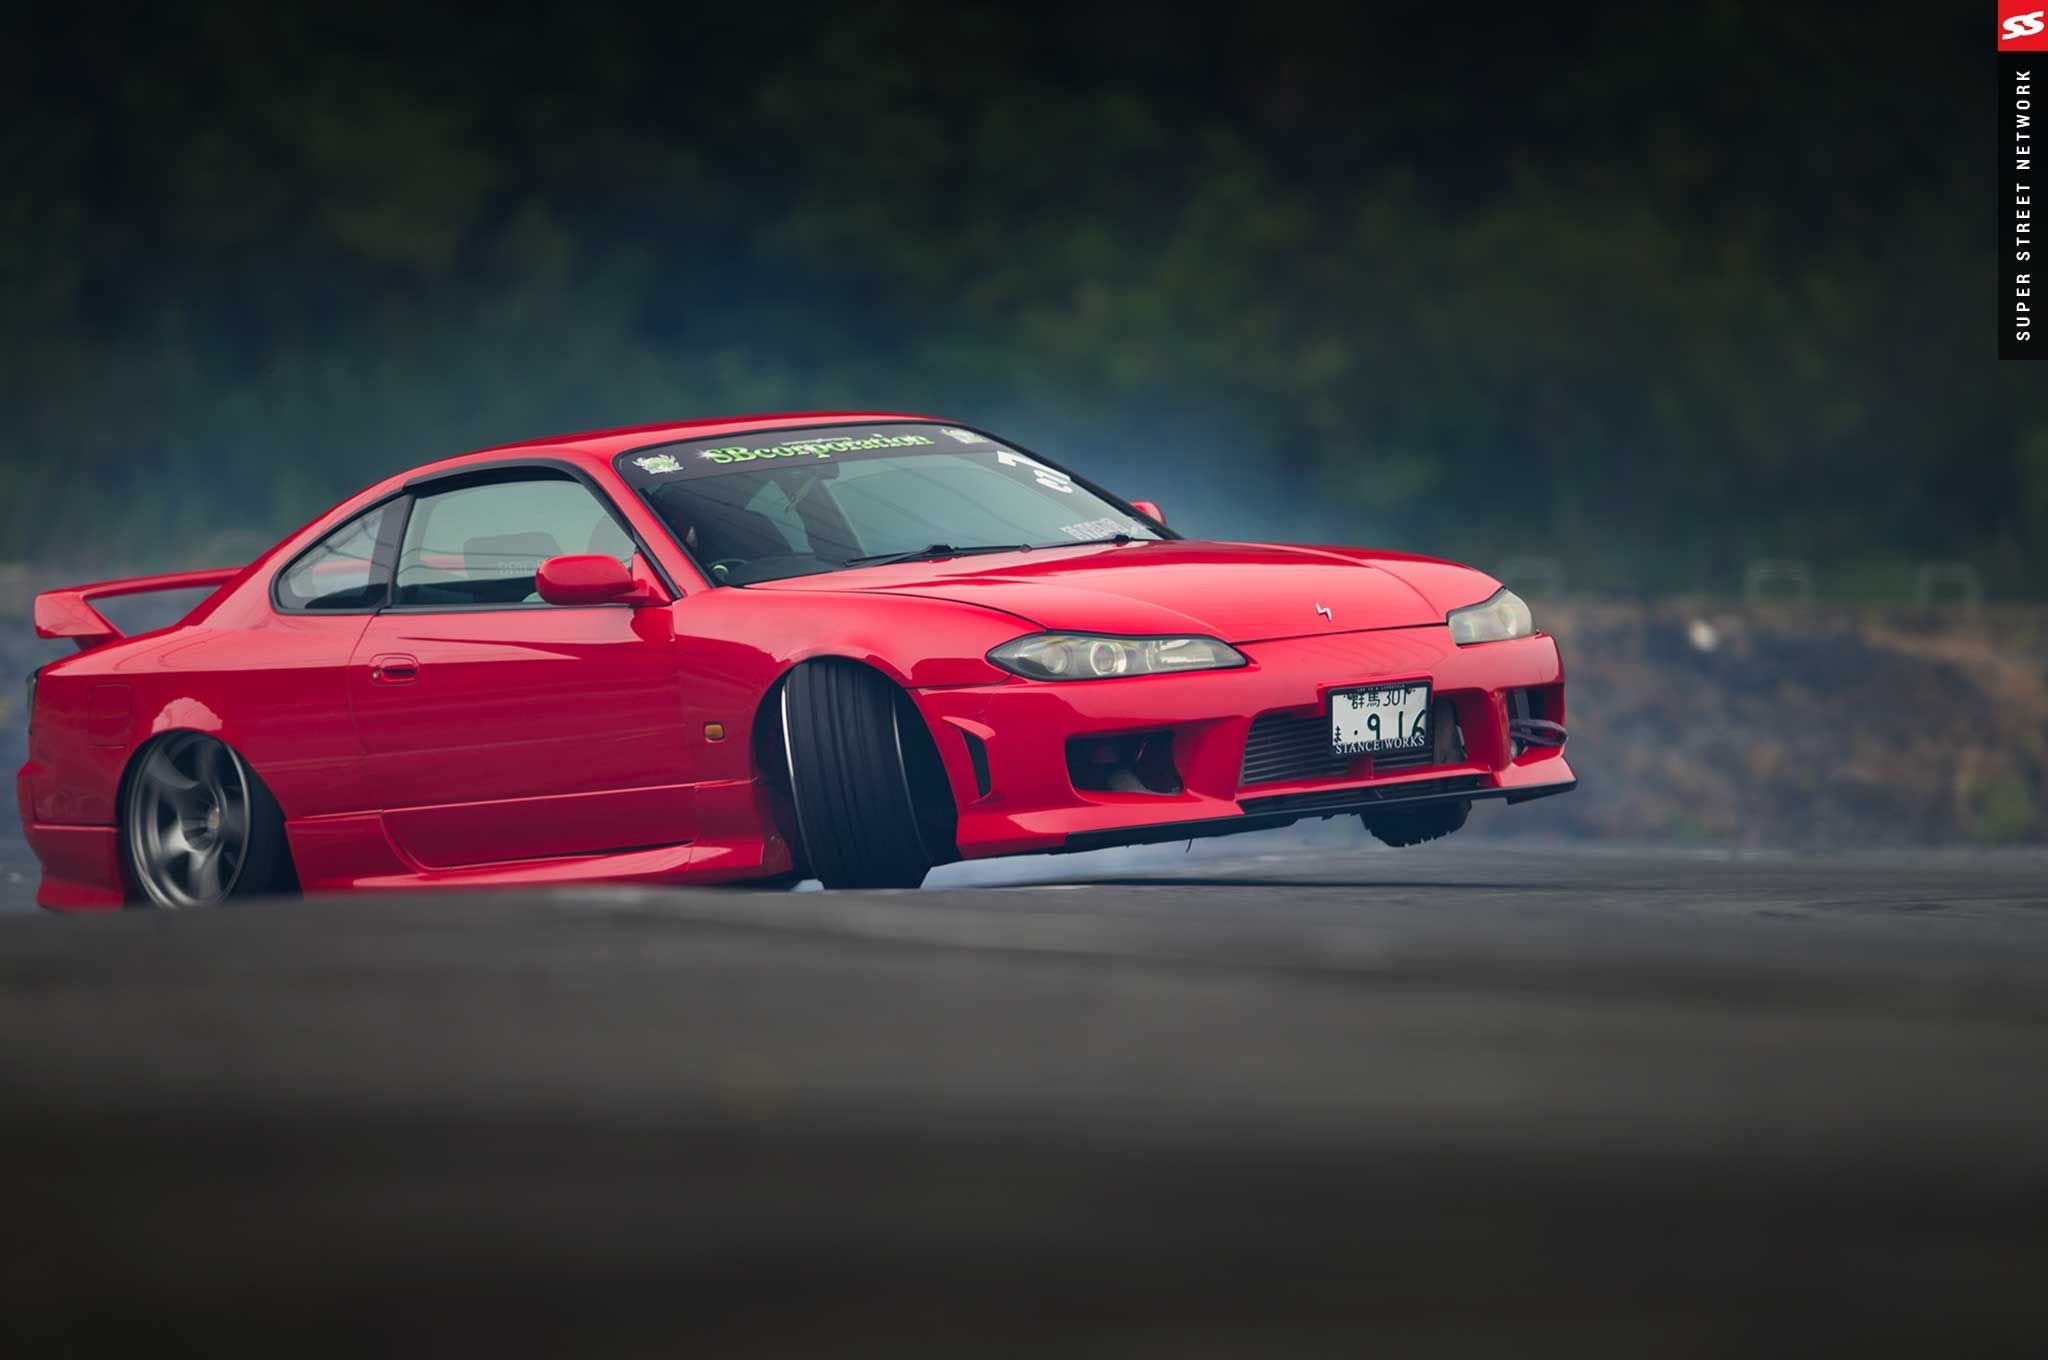 00 Nissan Silvia S15 Cars Red Modified Wallpapers Hd Desktop And Mobile Backgrounds